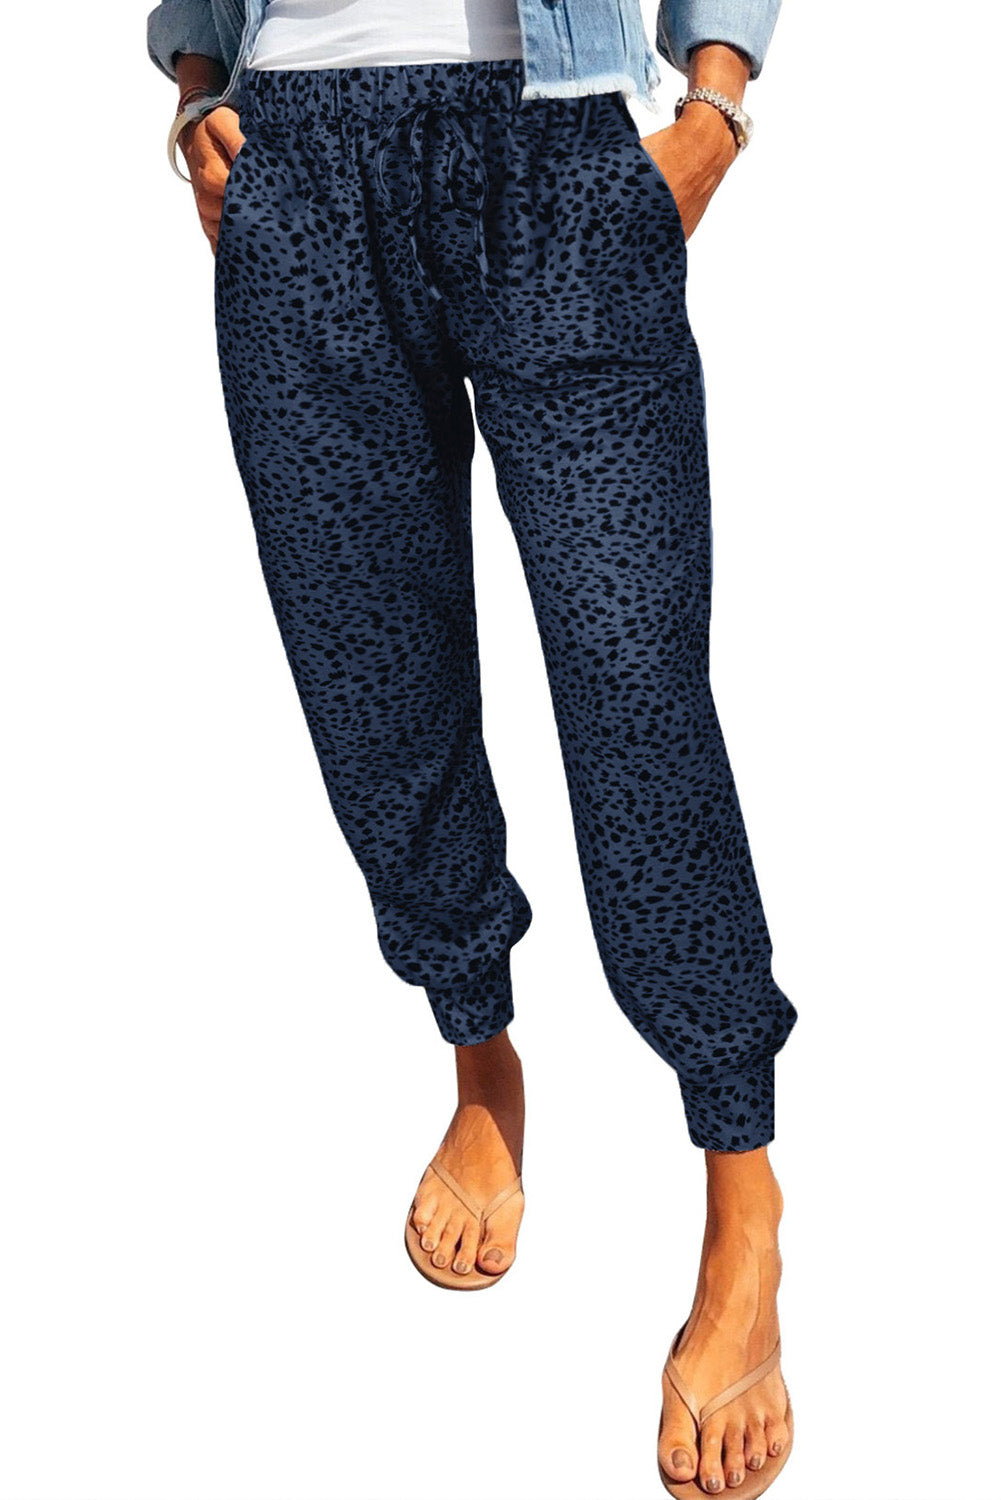 Women's Navy Blue and Black Leopard Print Jogger Pants with Pockets